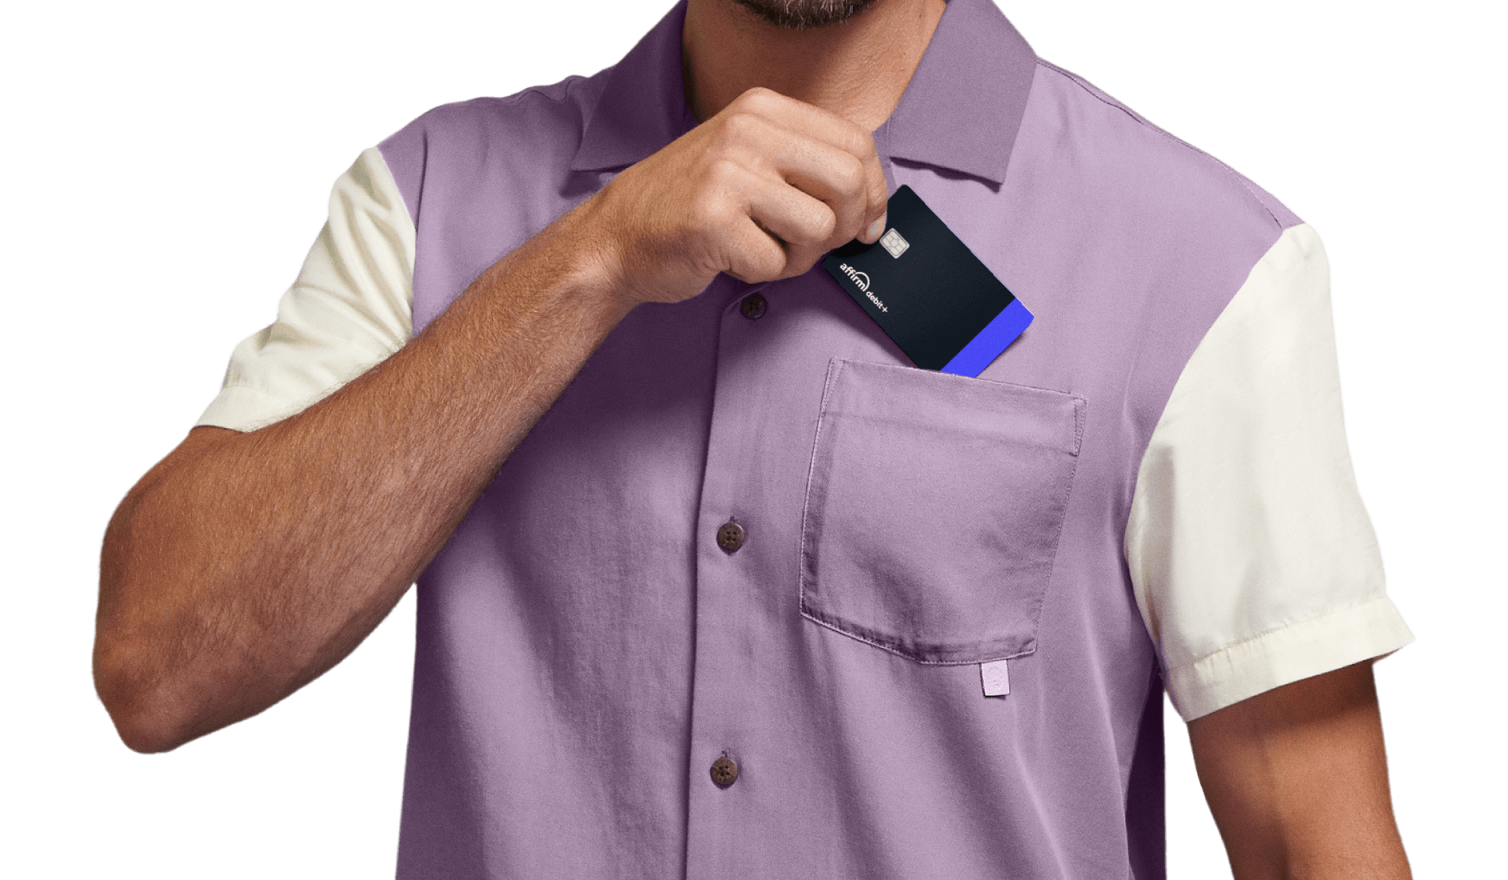 Man putting a debit card in his pocket